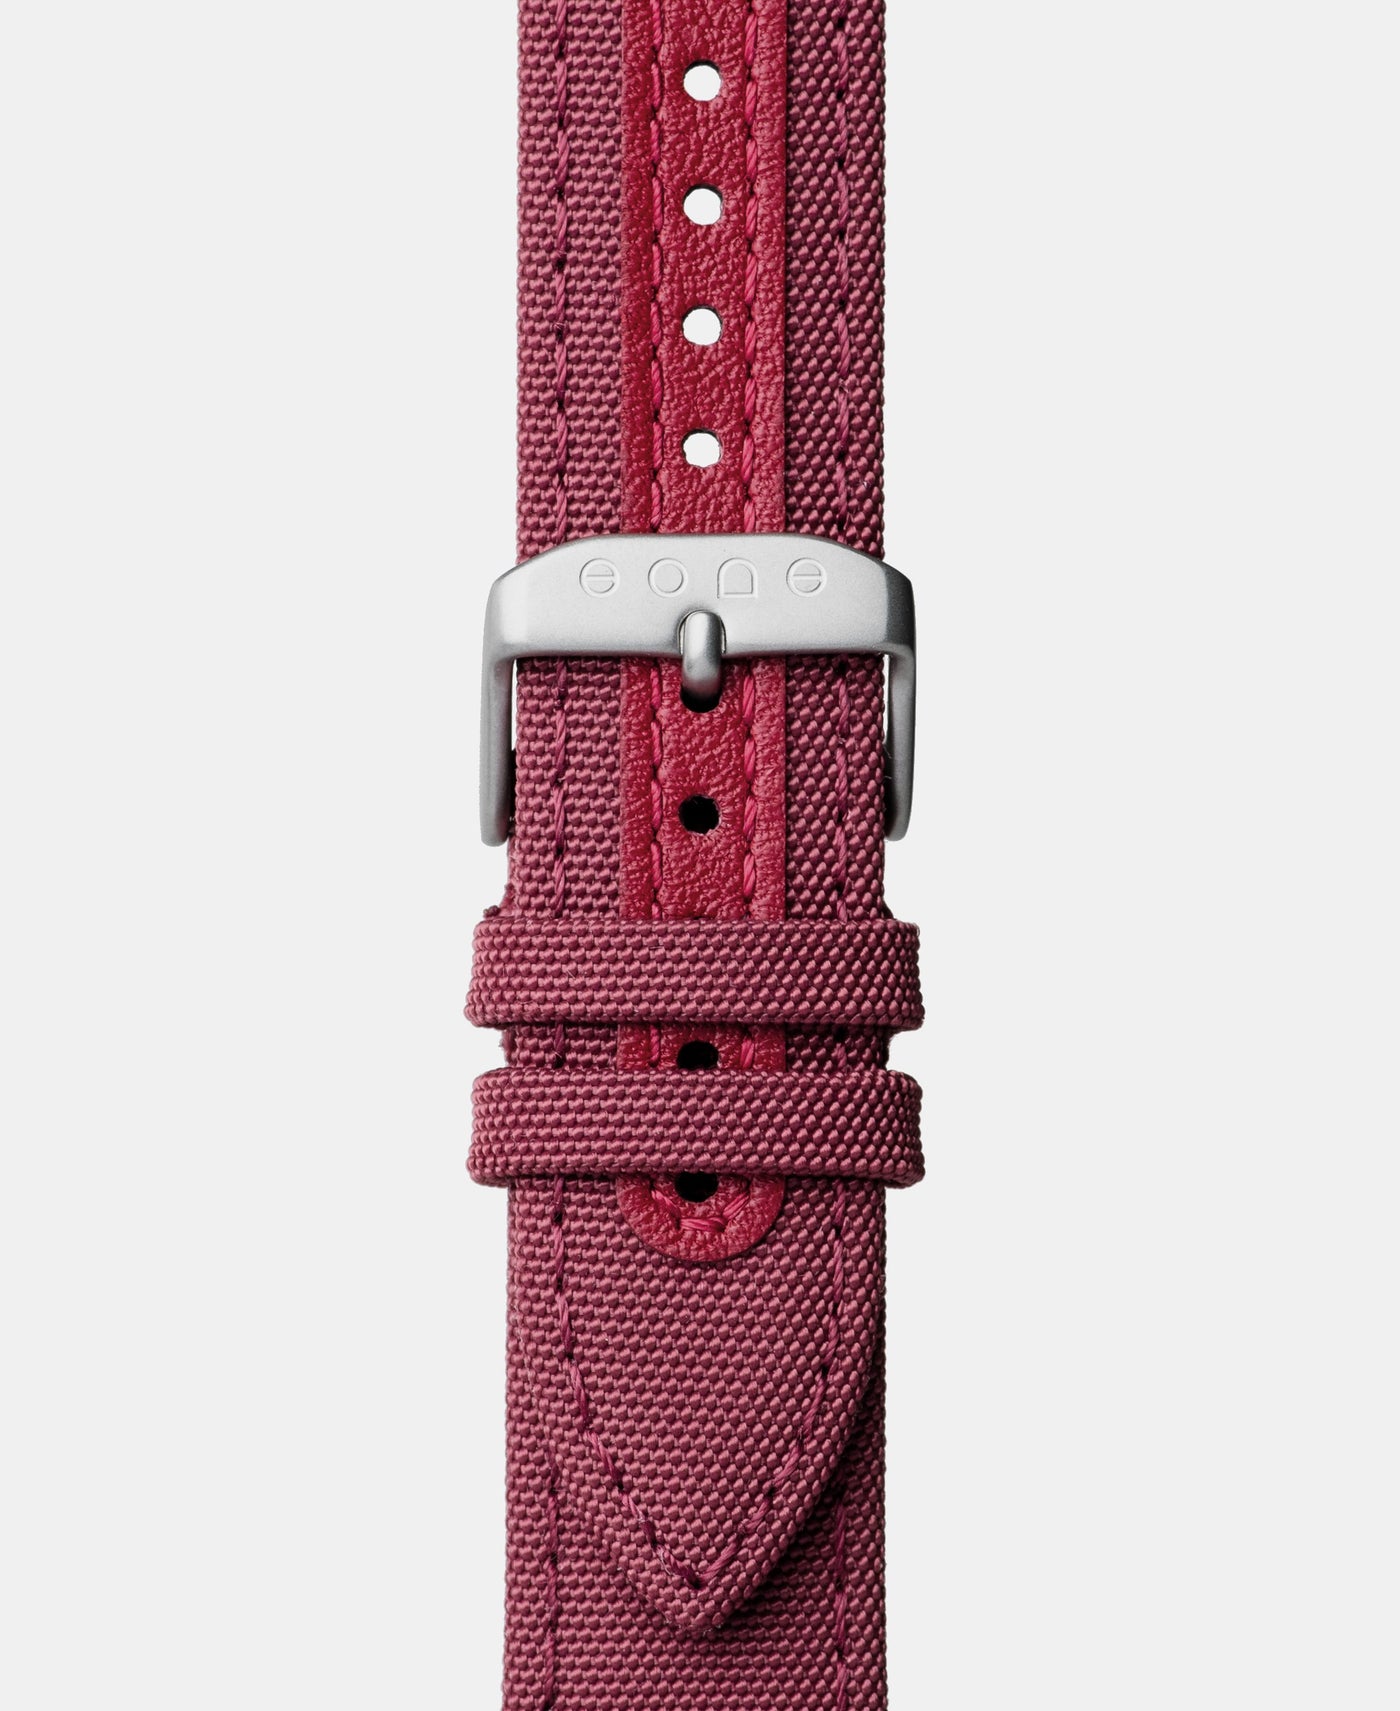 A photo shows the strap lying on a flat surface. One part has a buckle and the other part has a series of holes for an adjustable fit.